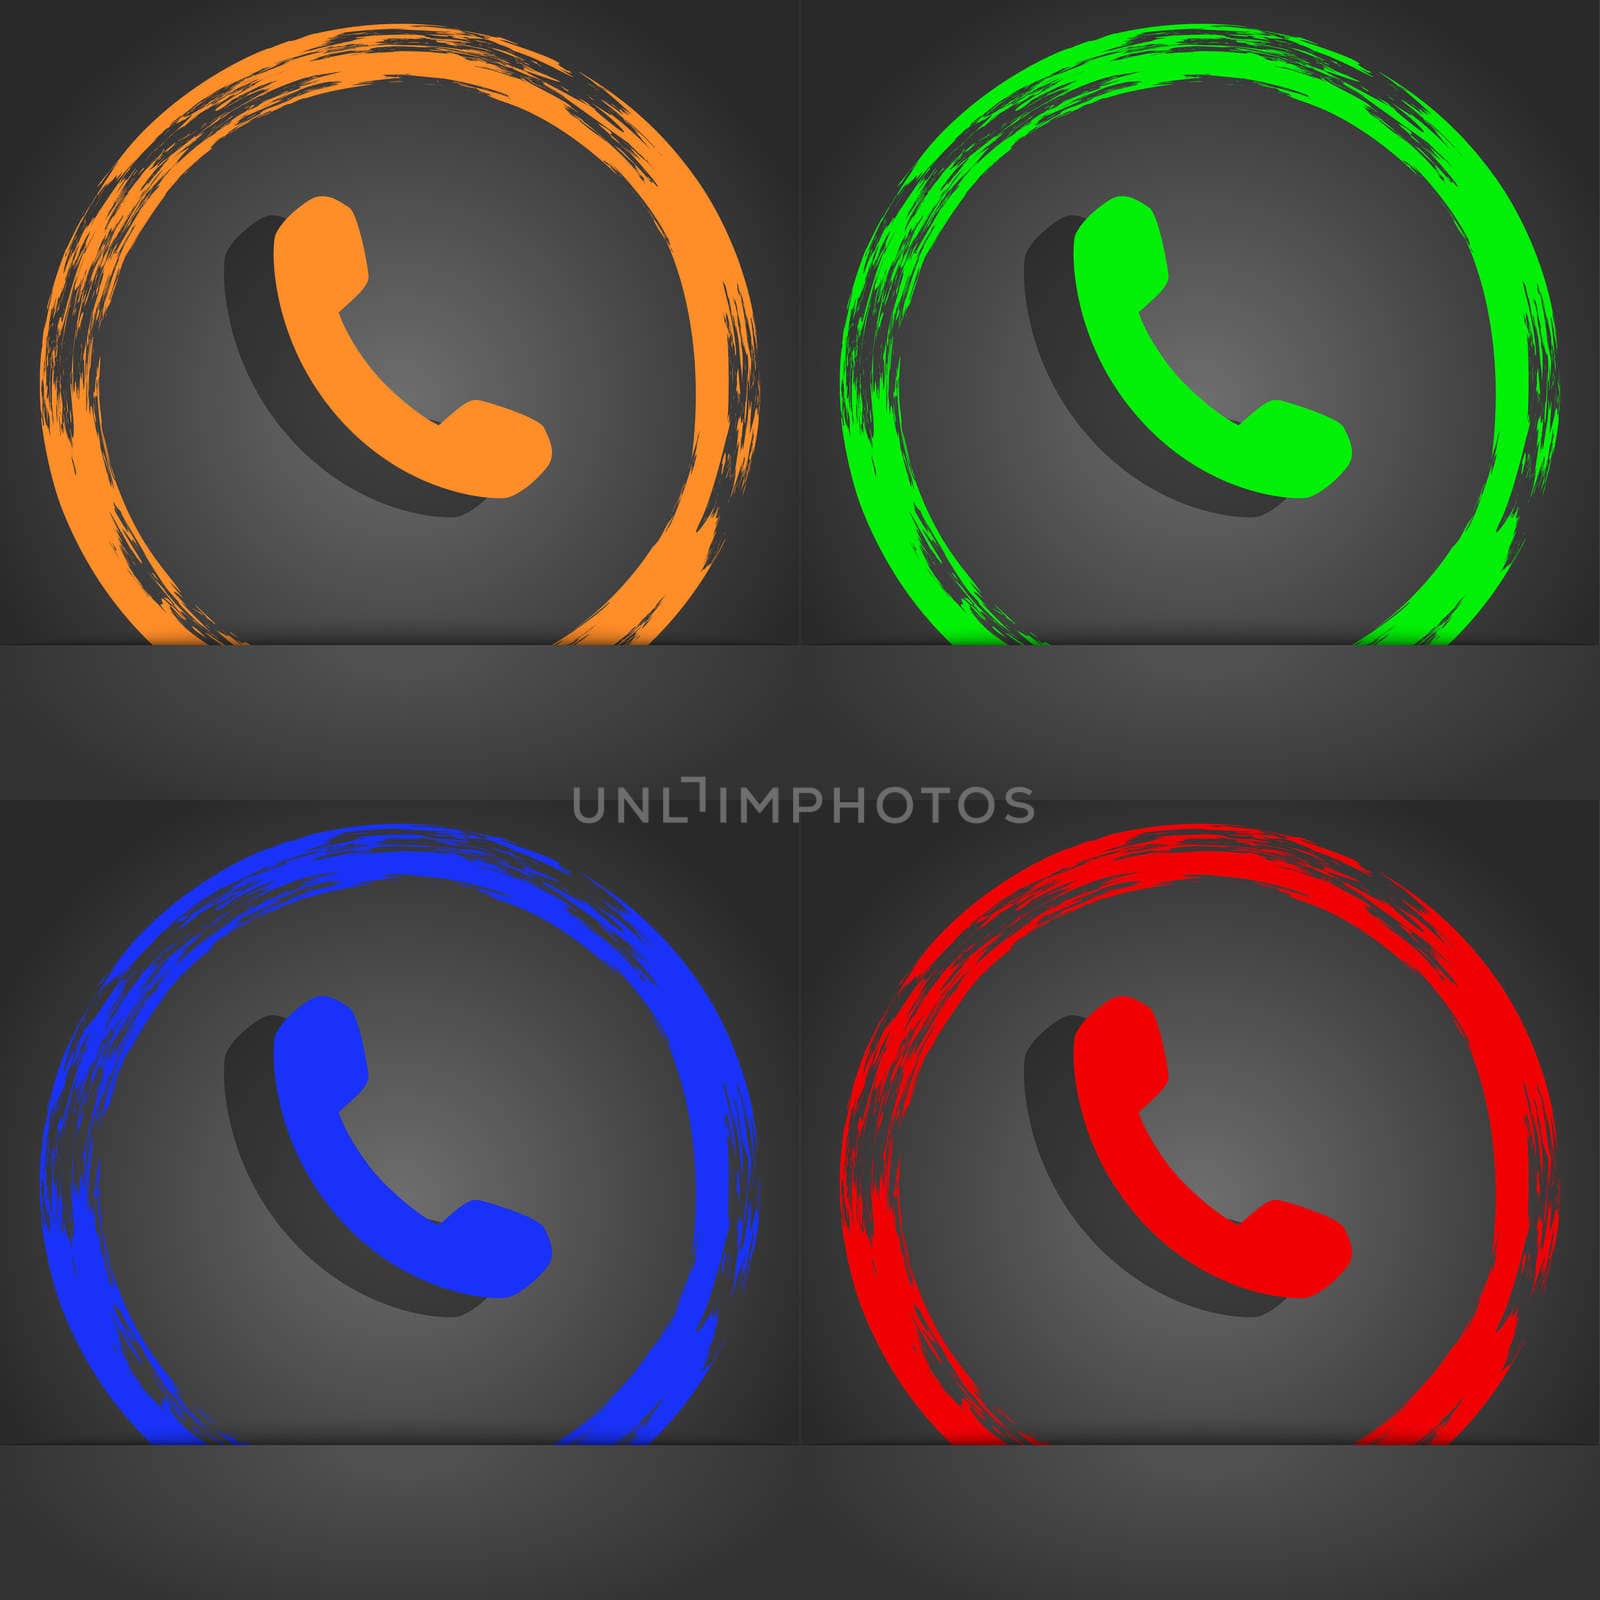 Phone, Support, Call center icon symbol. Fashionable modern style. In the orange, green, blue, green design. illustration